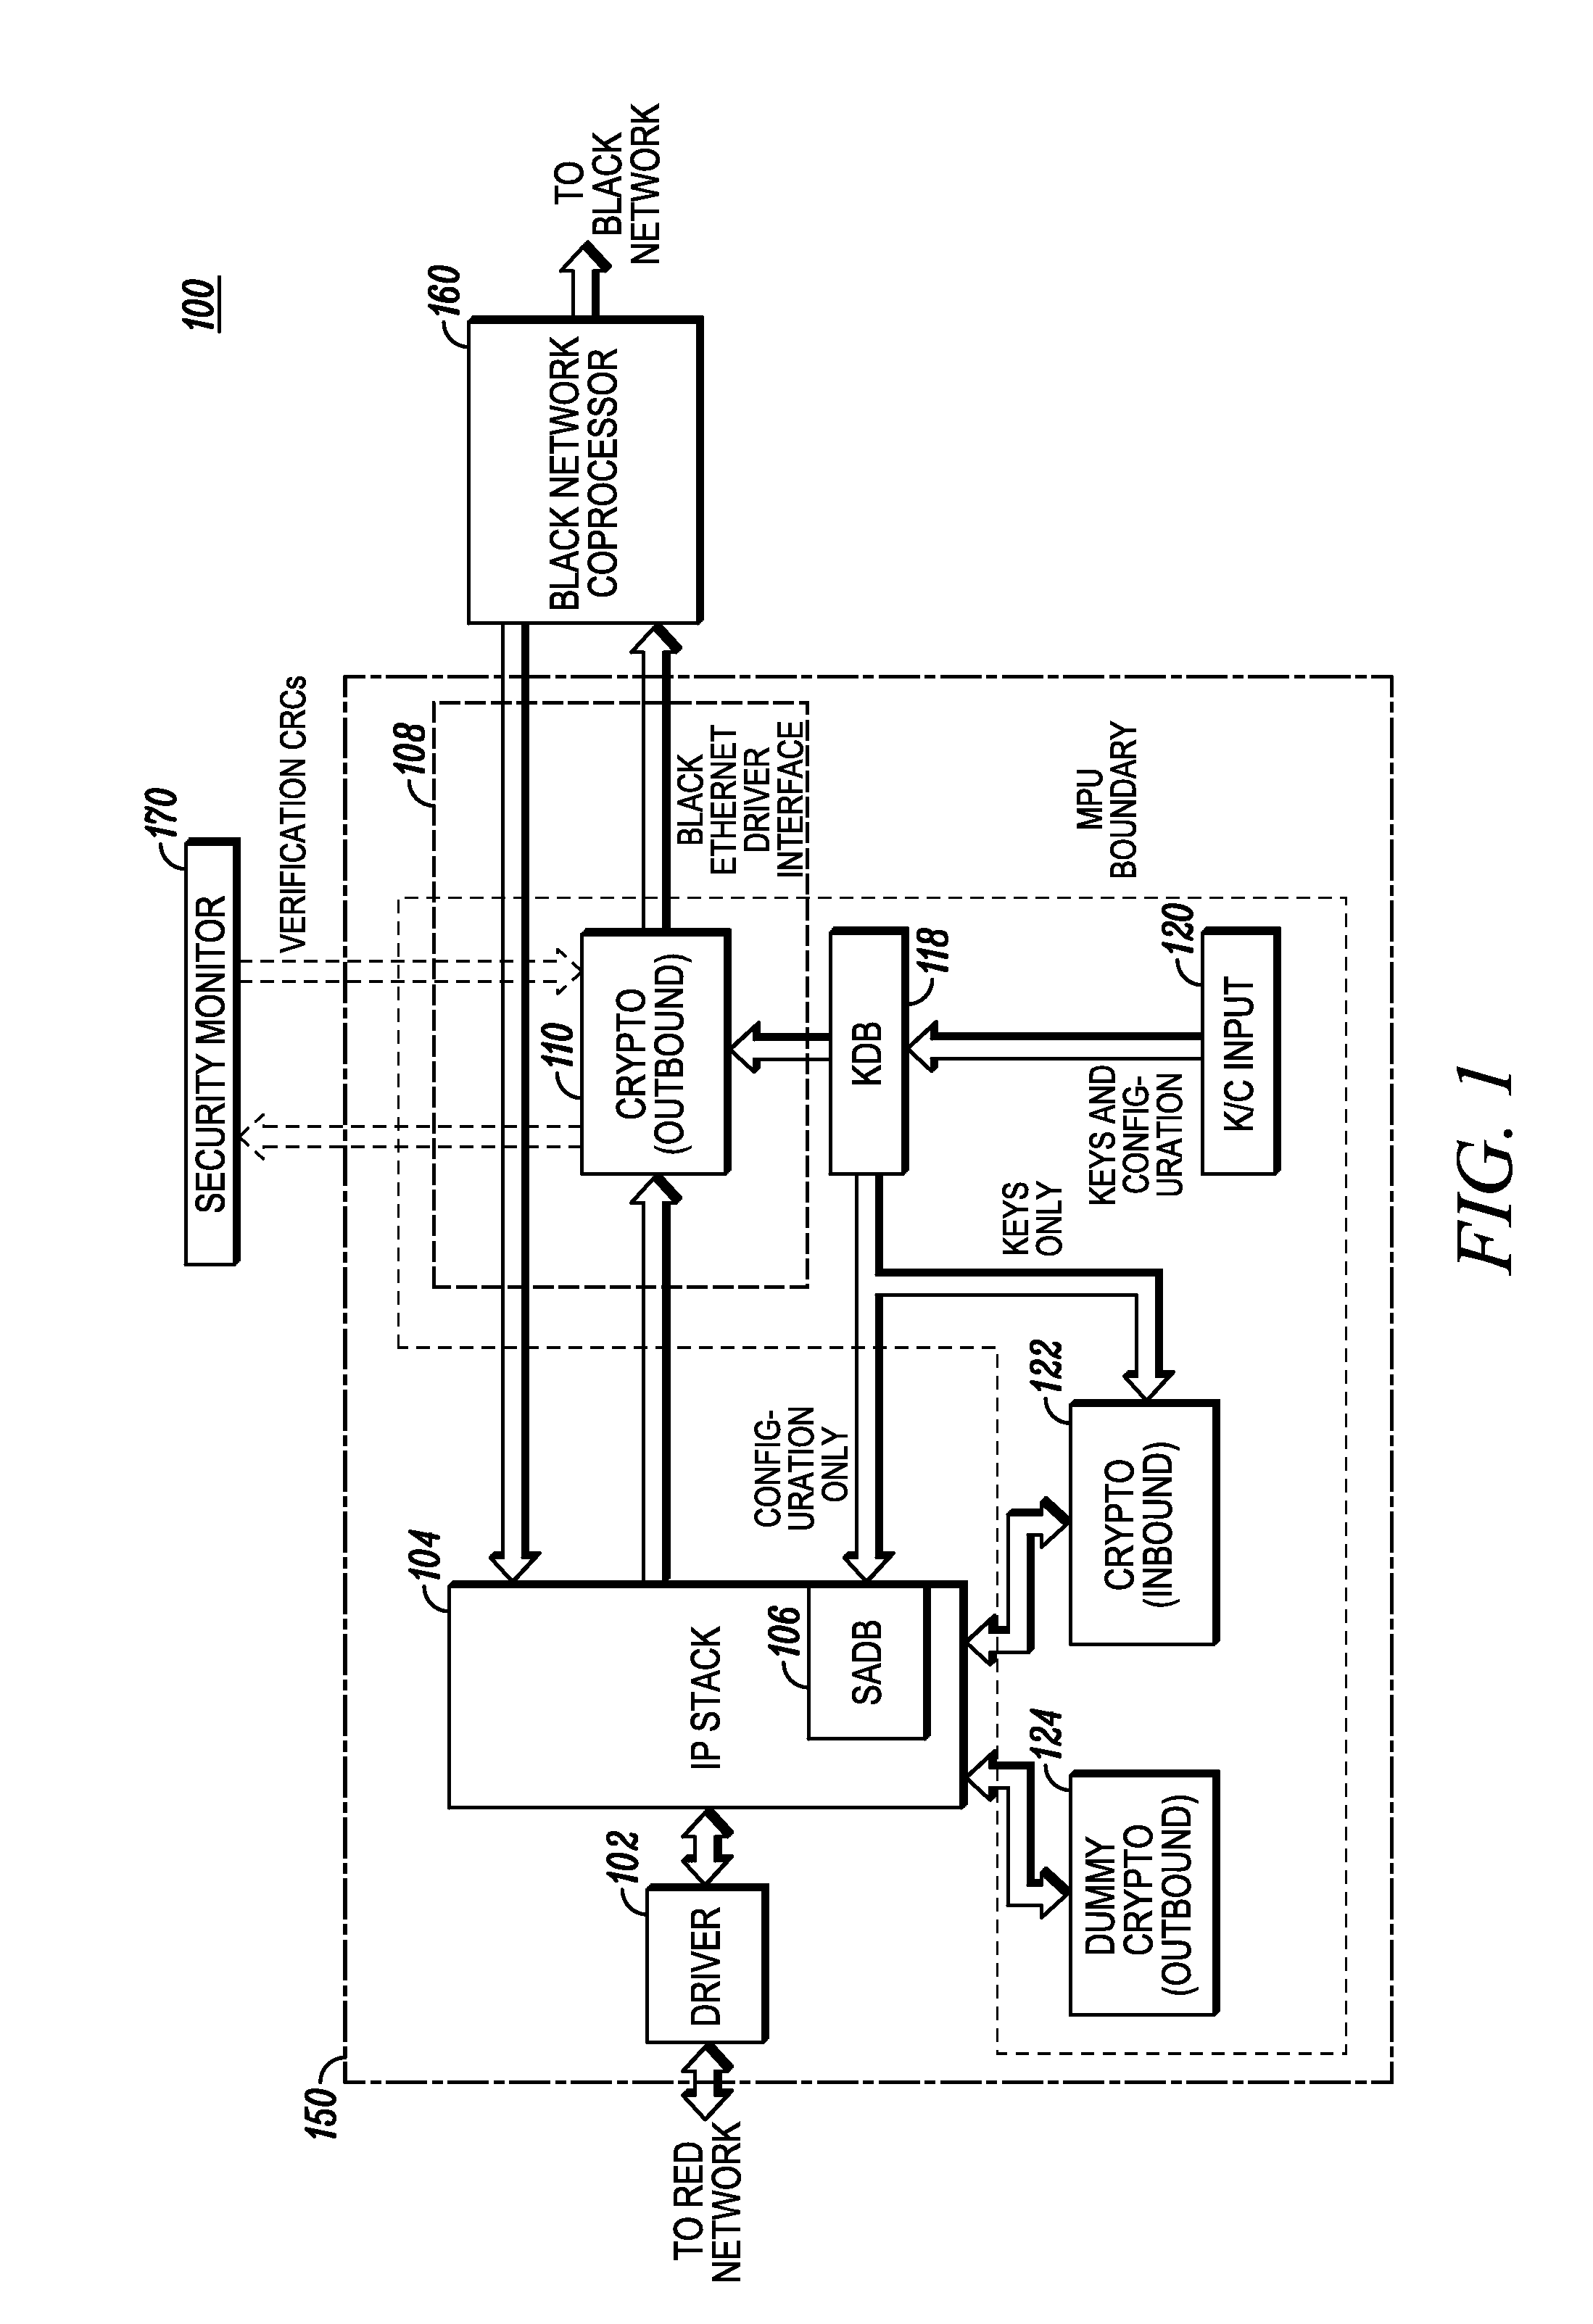 Method to construct a high-assurance ipsec gateway using an unmodified commercial implementation